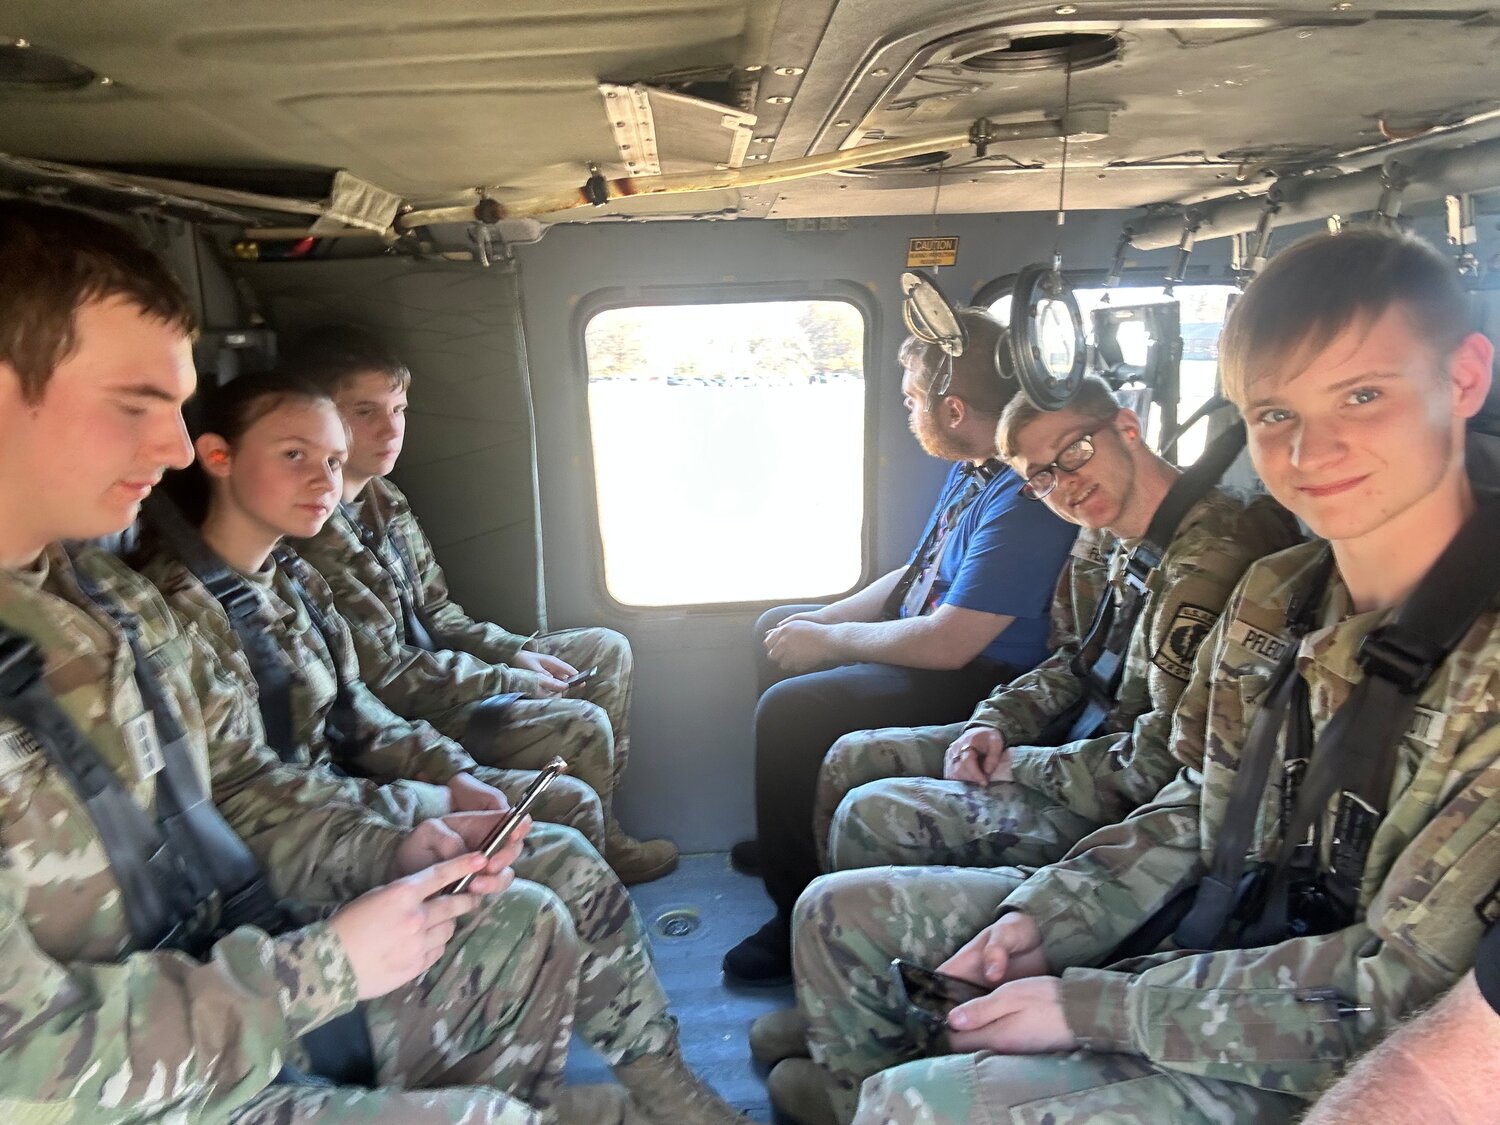 THE THRILL AND ADVENTURE OF FLIGHT was on tap for Clinton students Dillon Wheeler, Cheyanne Edwards, Braeden Walters, Robert Mendenhall, Jacob Pfleiderer and Sam Humphreys who rode aboard a Black Hawk helicopter from the CHS campus for a tour of the area.